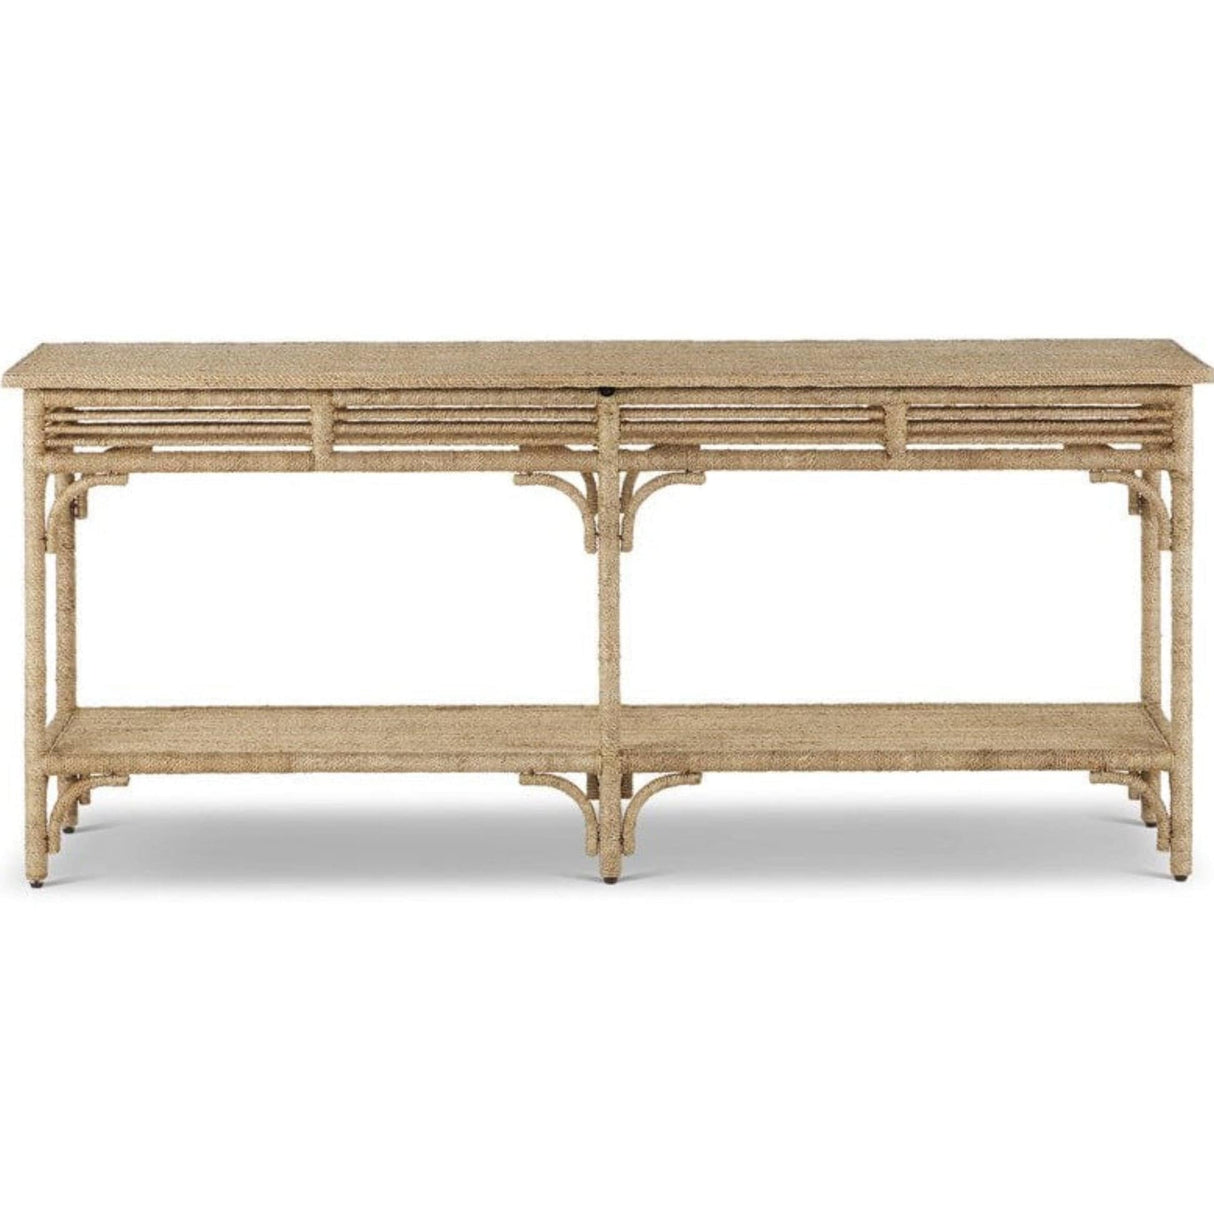 Currey & Company Olisa Rope Console Table Tables currey-co-3000-0246 633306001329